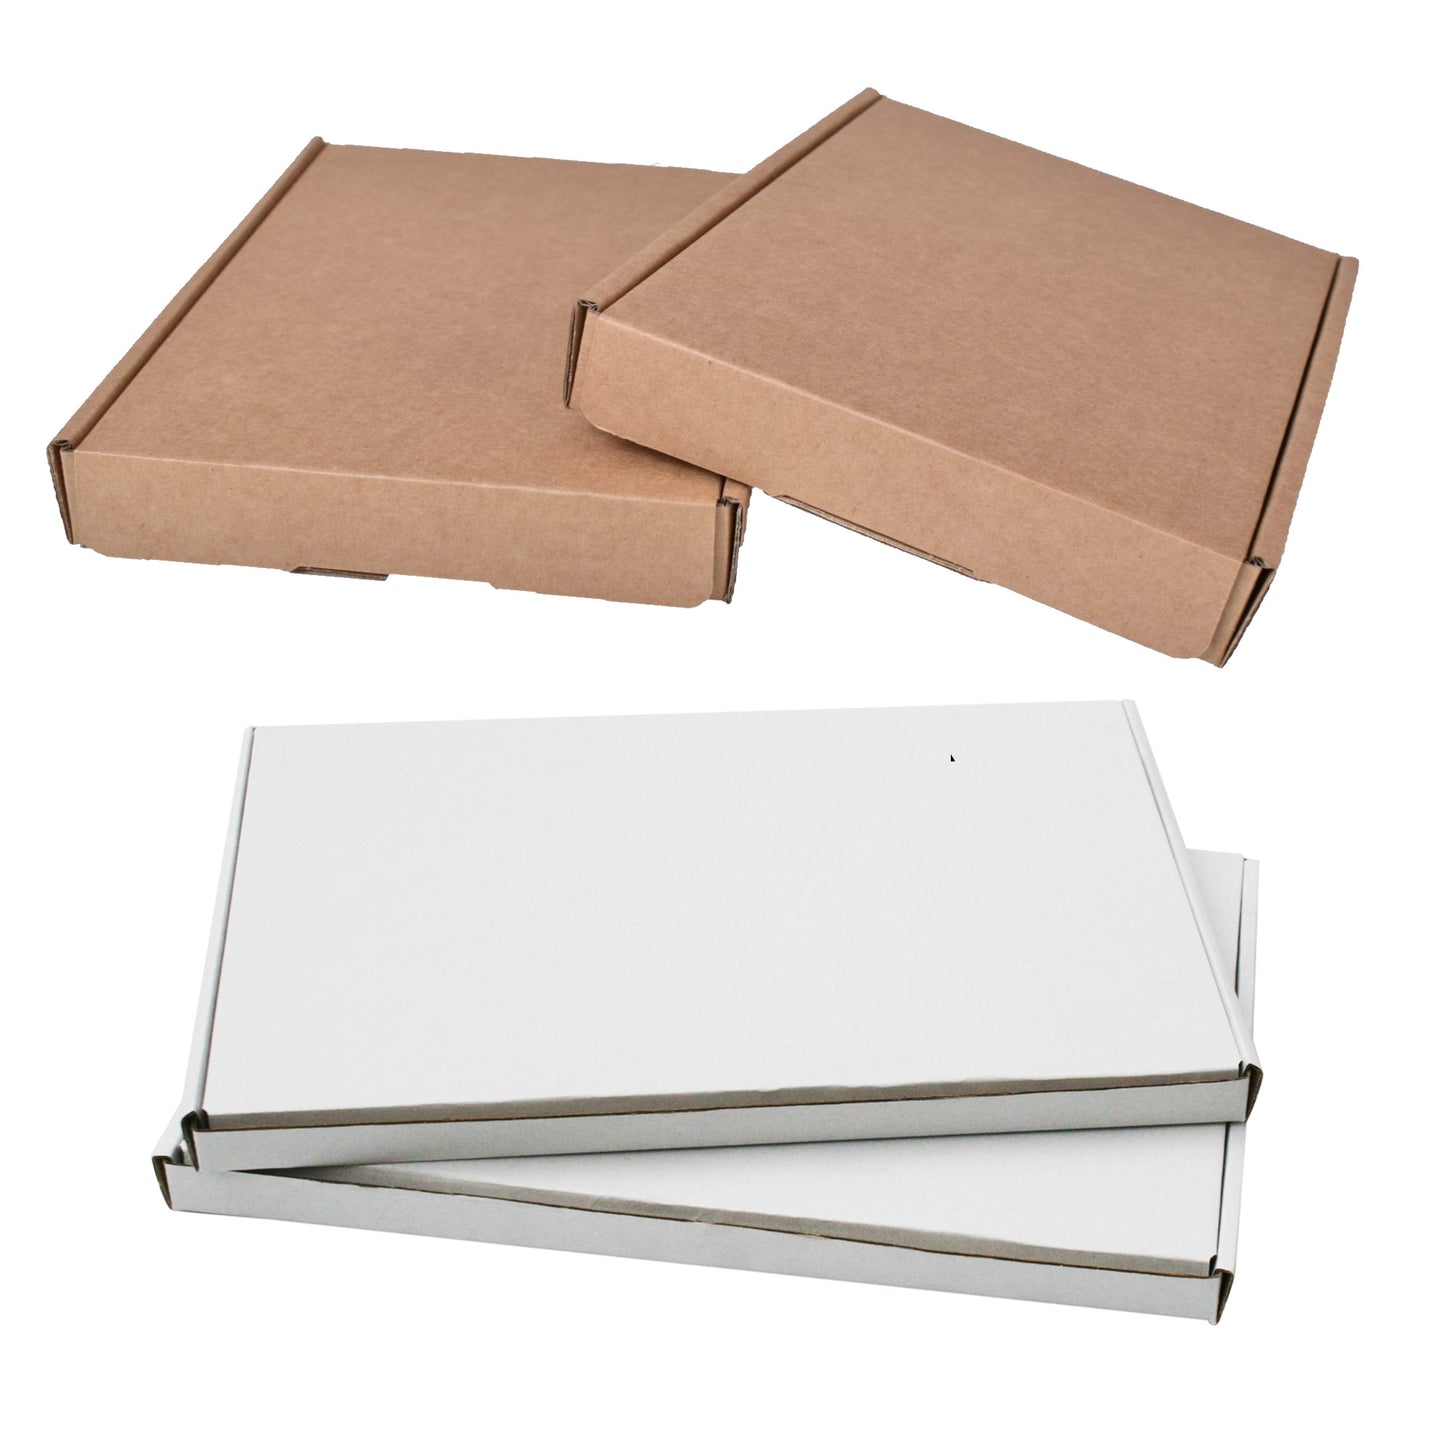 Selection Of Small Single Wall Die Cut Packing Shipping Boxes C4,C5 & C6